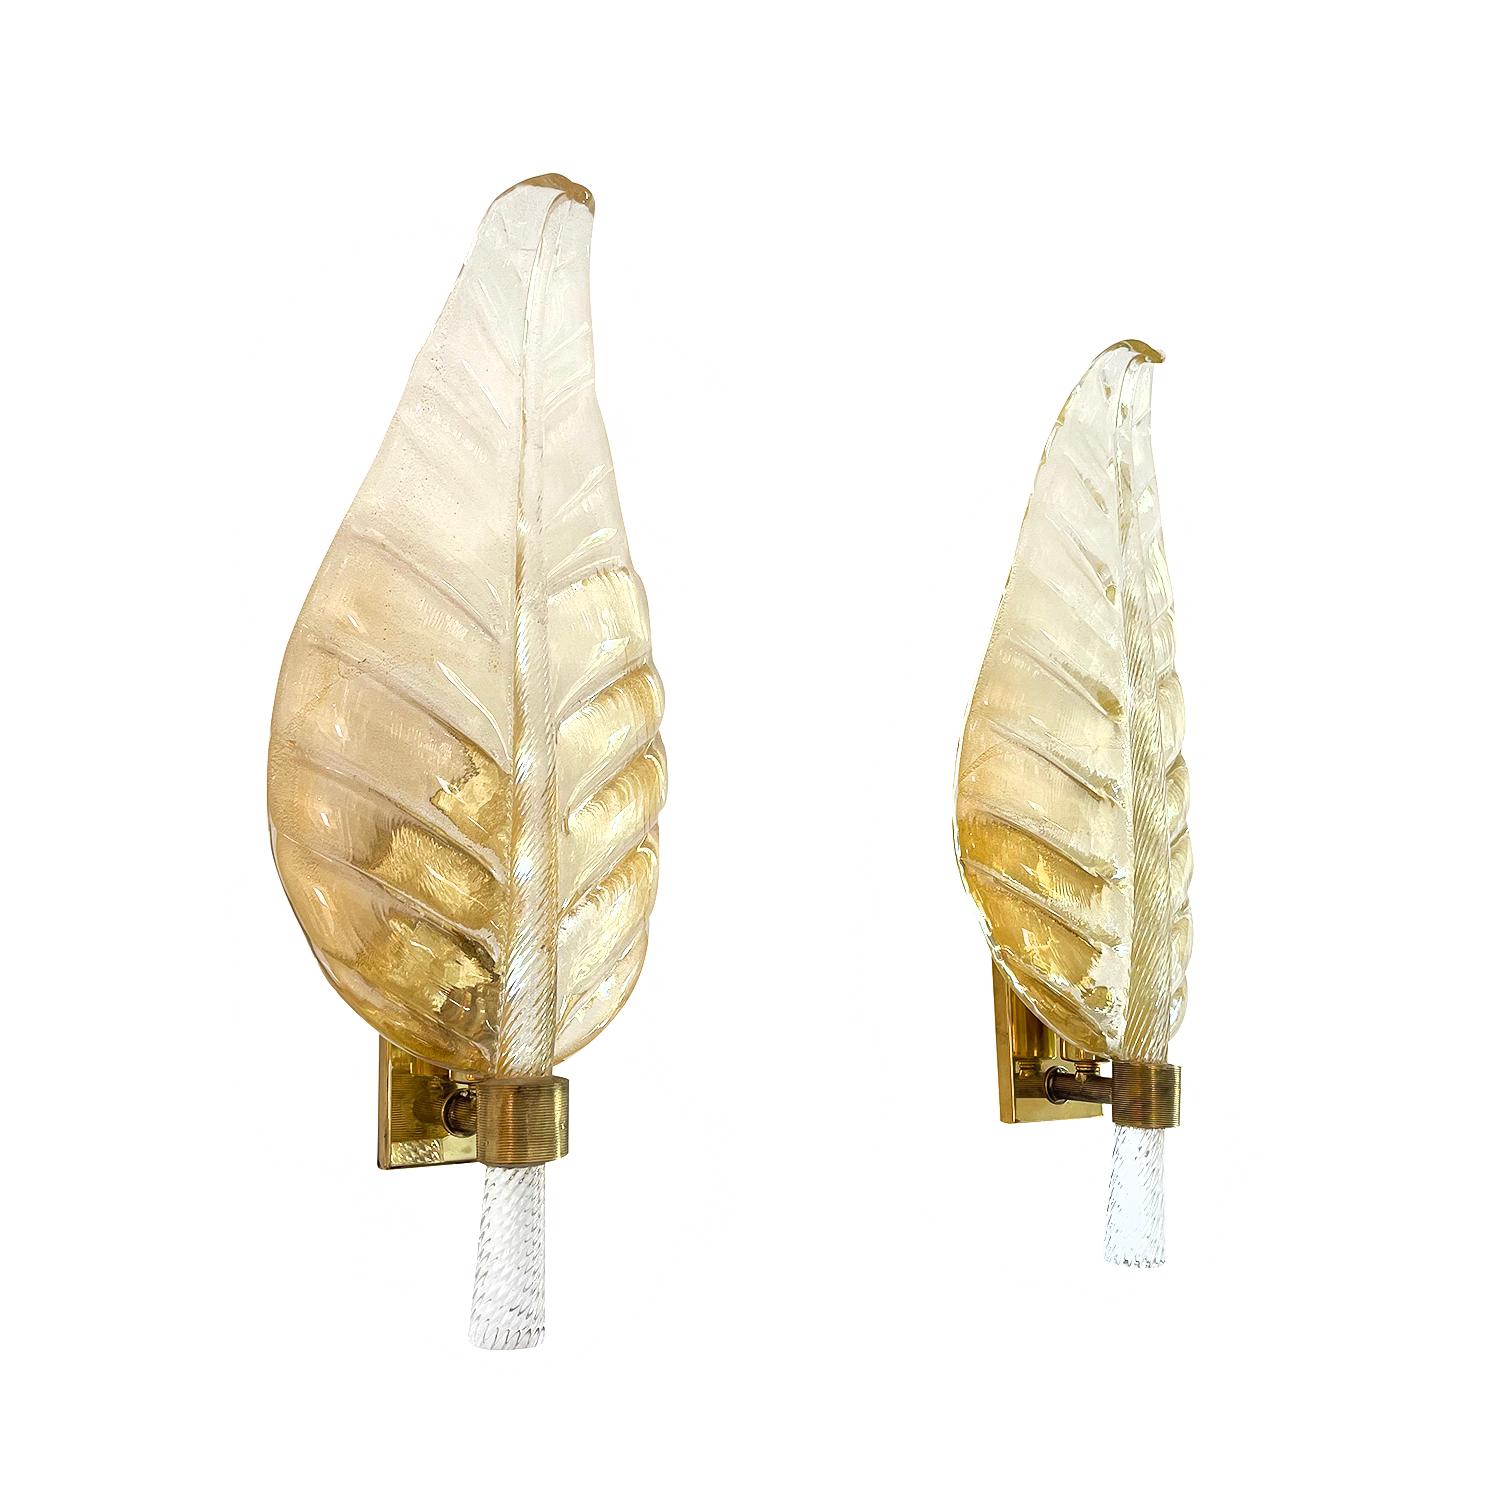 A smoked gold, vintage Mid-Century Modern Italian pair of wall sconces made of hand blown Murano glass Oro Sommerso with a polished brass stripped ring, supported by a rectangular brass structure, imitating a large leaf. Each of the light fixtures